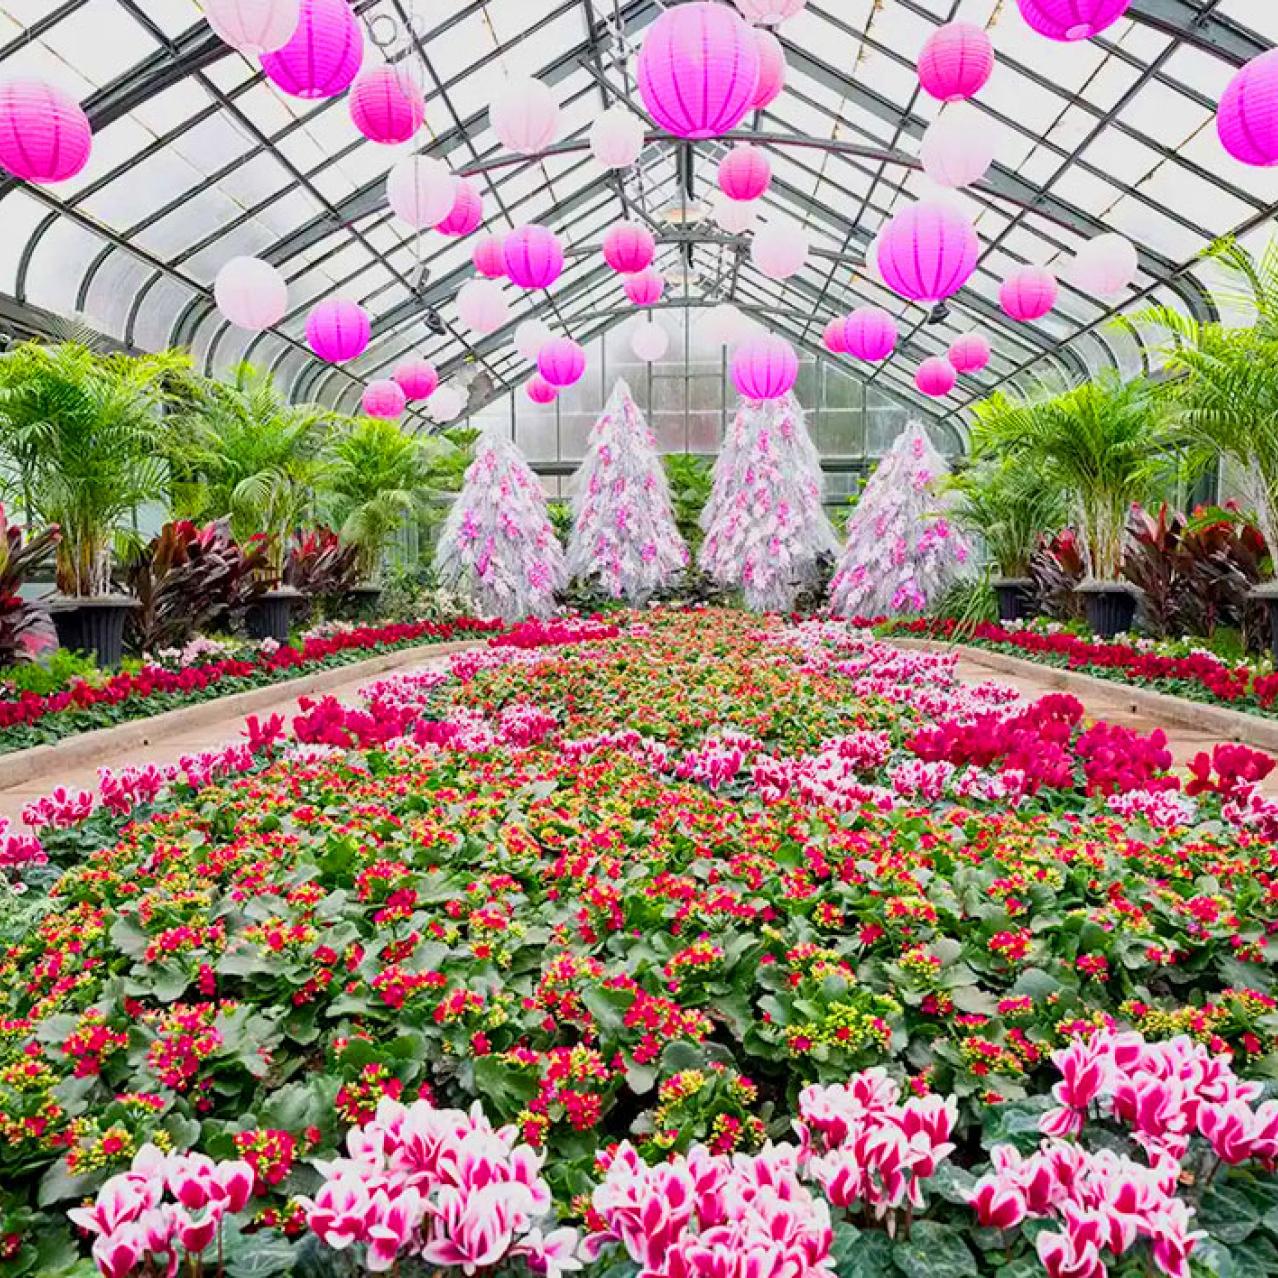 Cyclamen Display at the Floral Showhouse